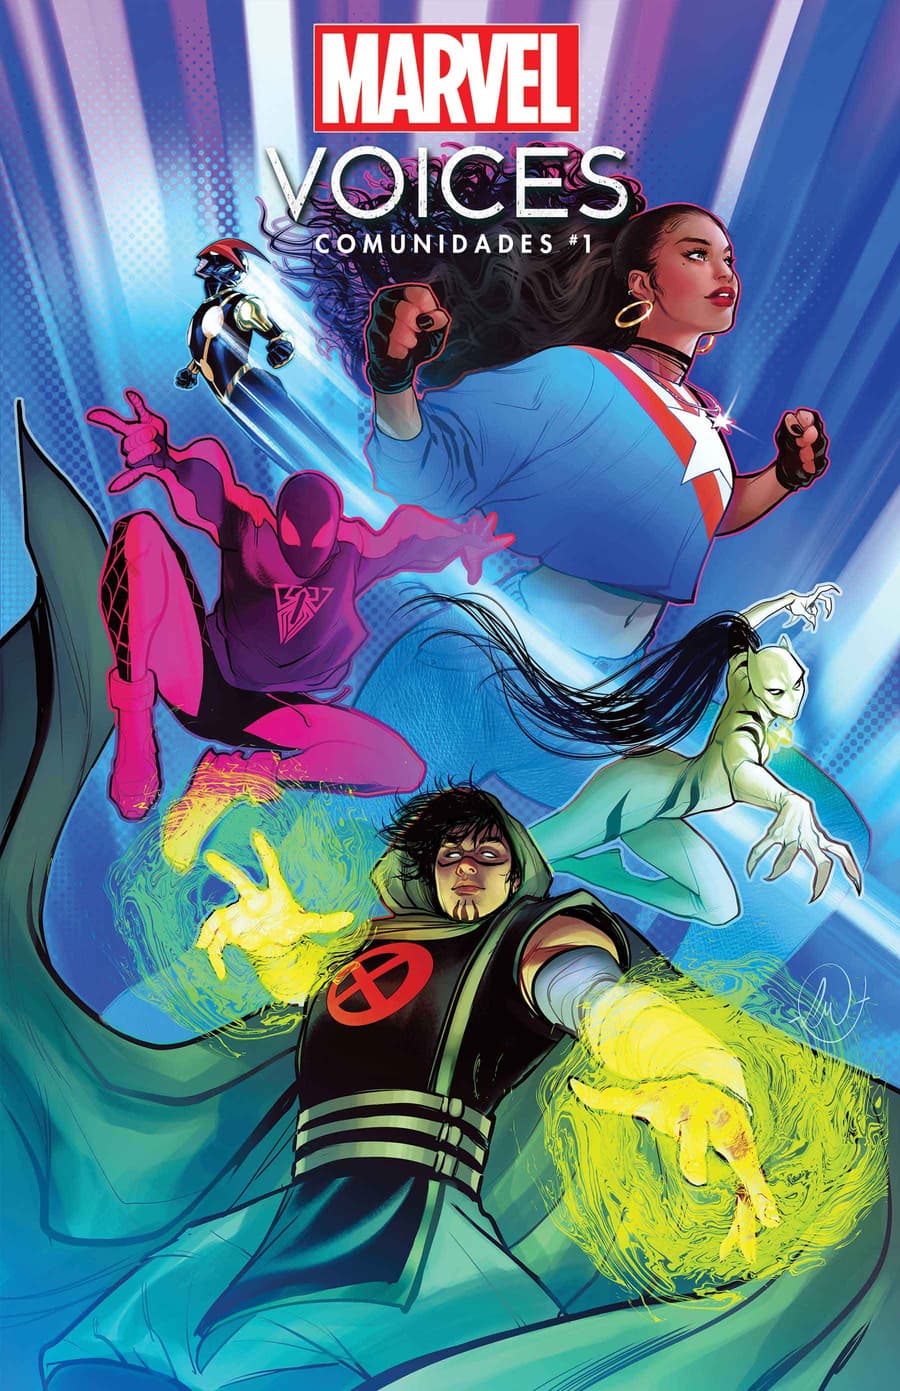 MARVEL’S VOICES: COMUNIDADES #1 cover by Lucas Werneck